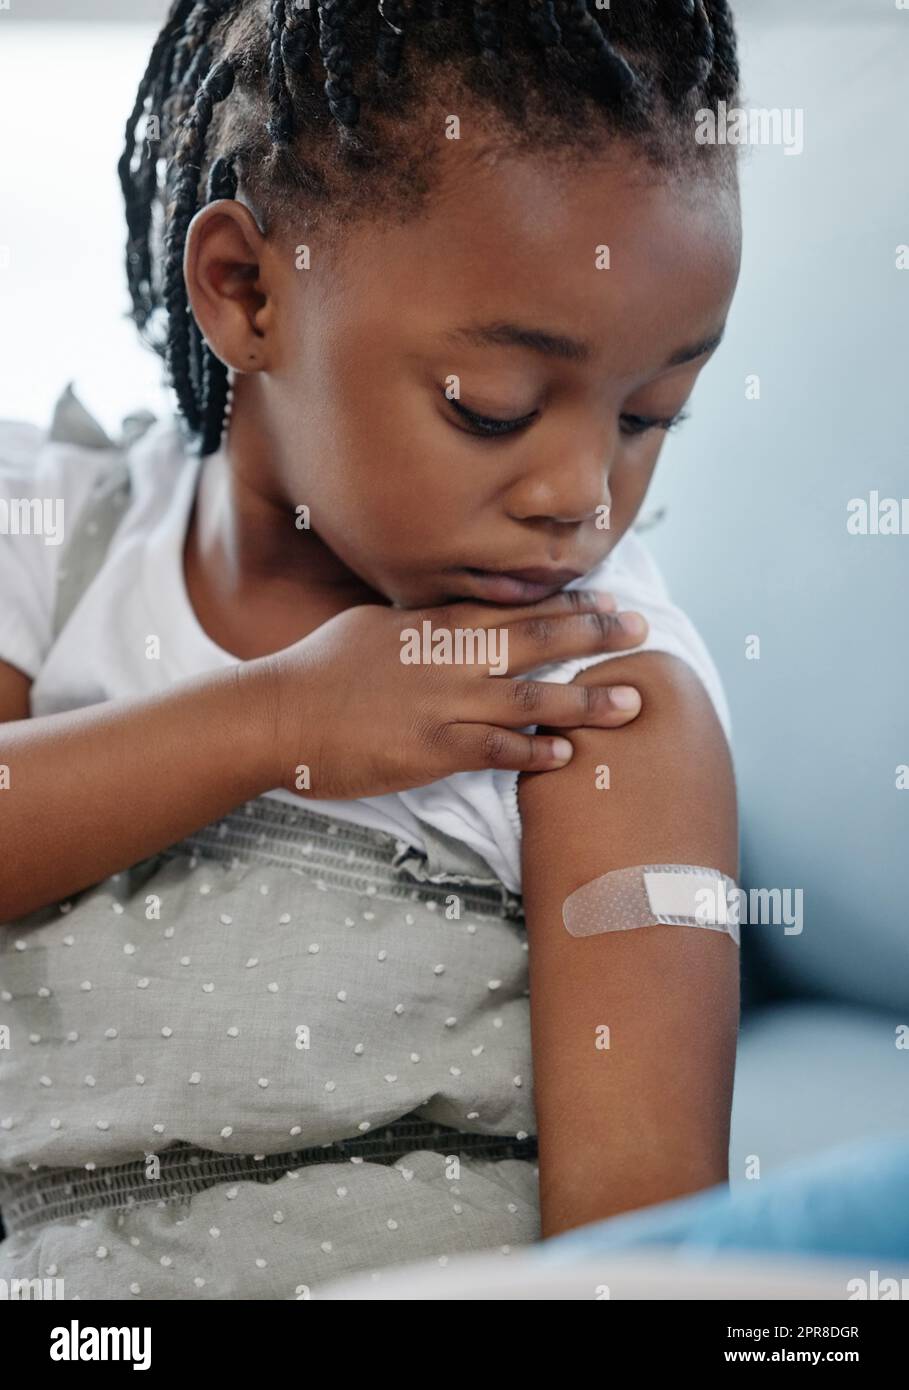 Vaccinate to protect your child against many dangerous diseases. Shot of an adorable little girl with a plaster on her arm after an injection. Stock Photo